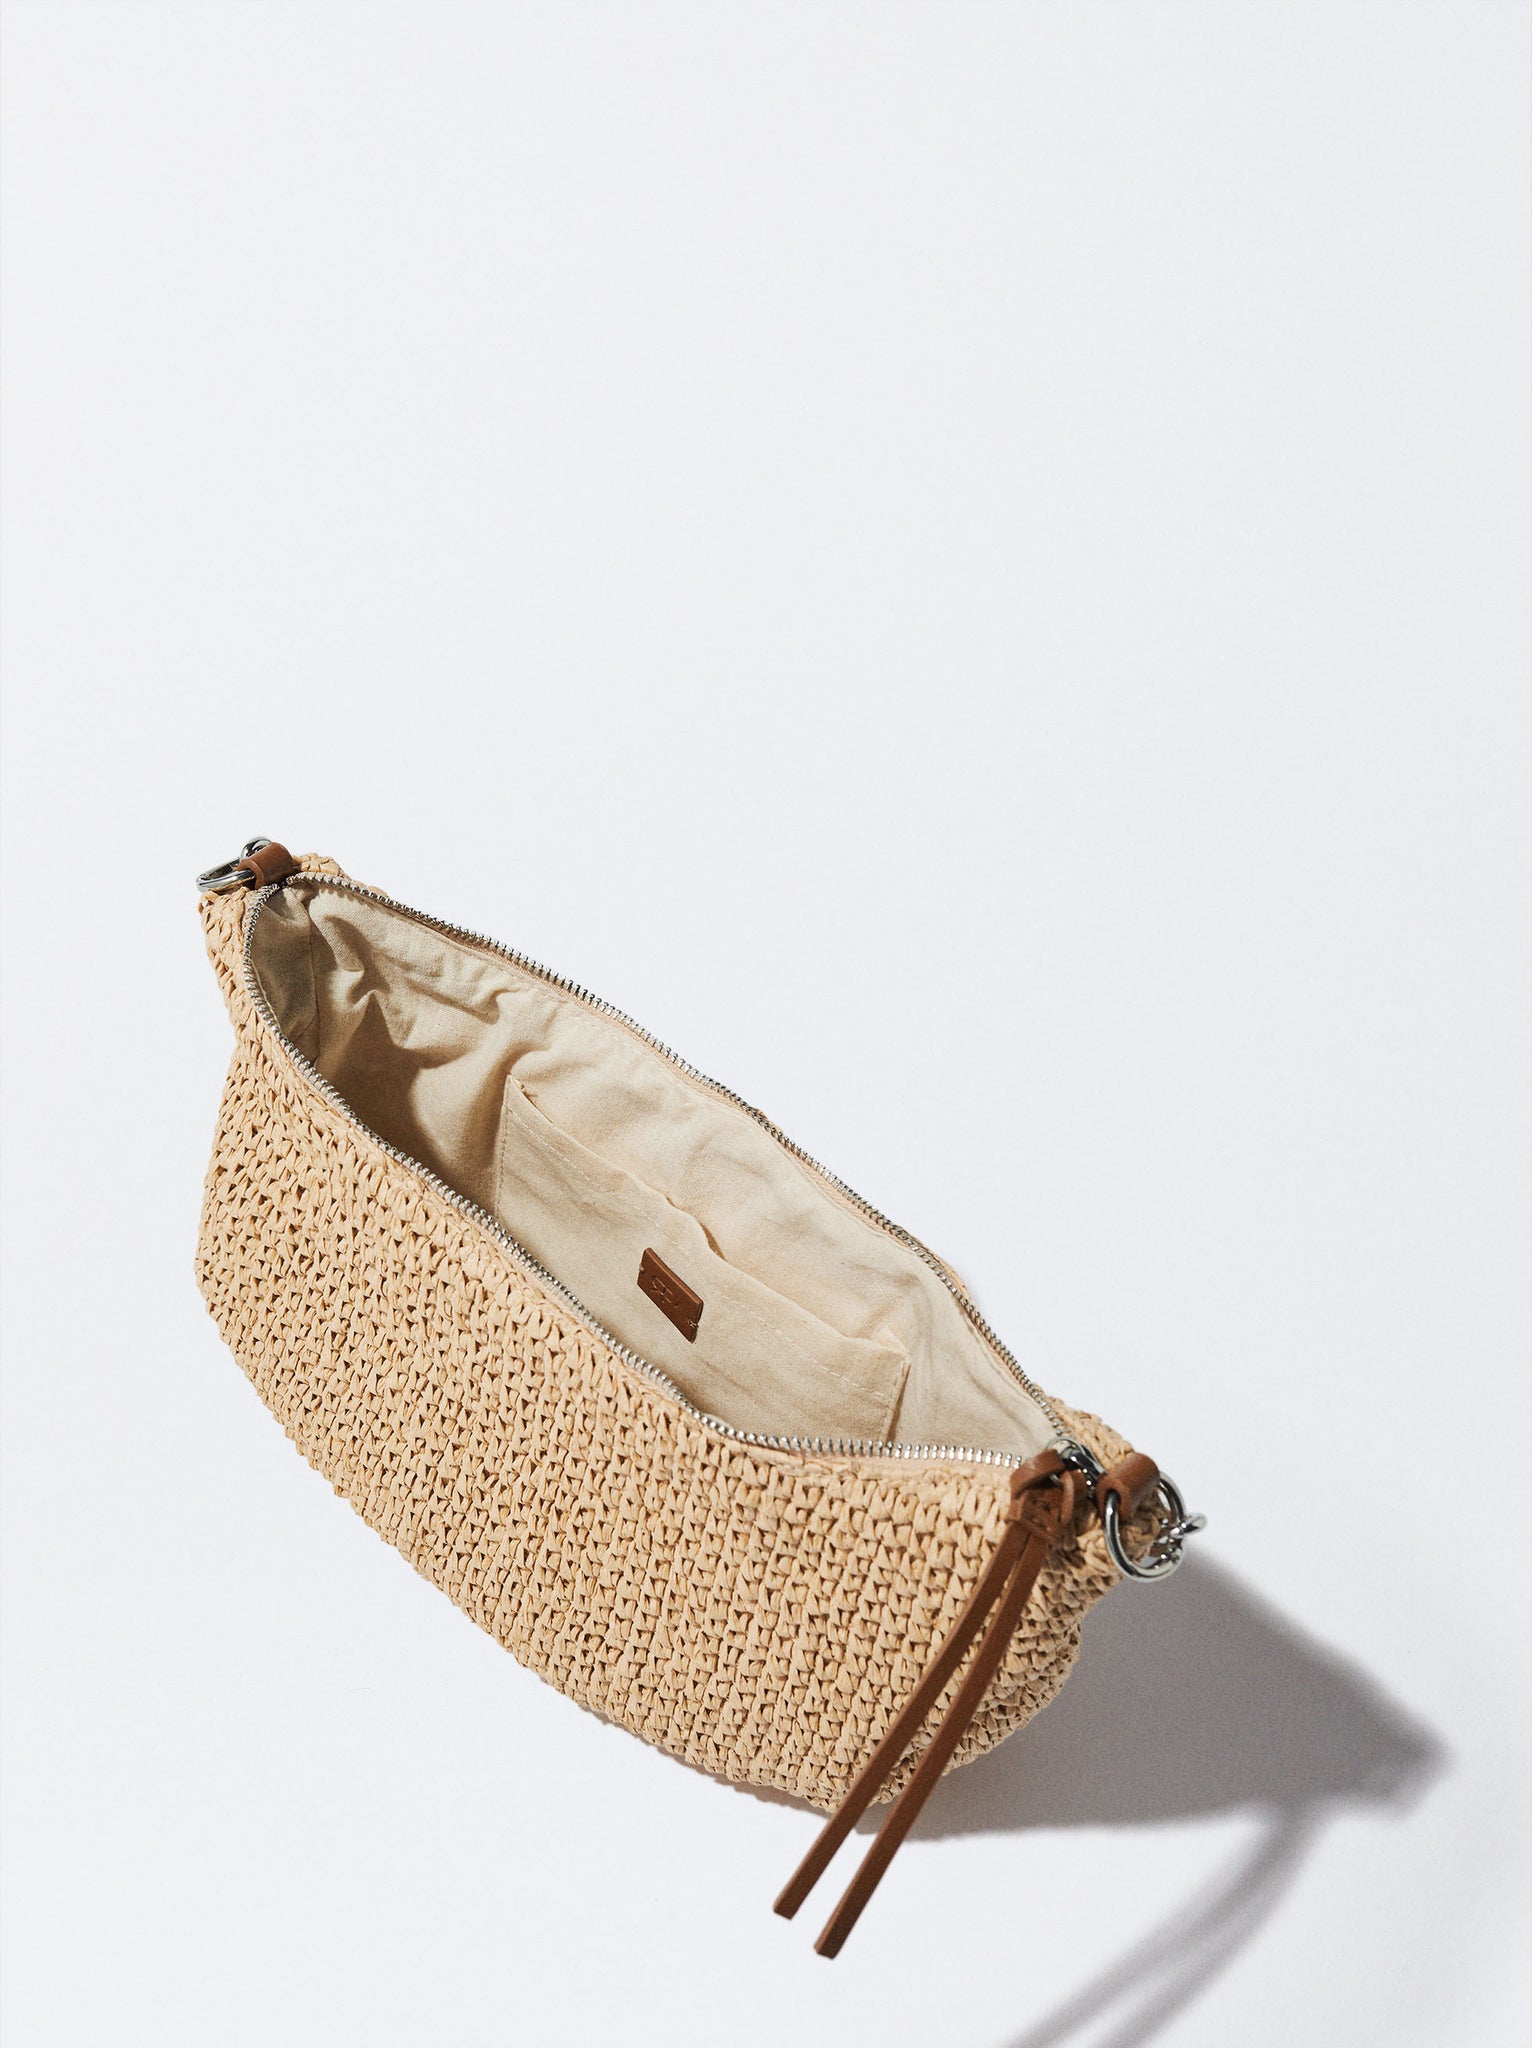 Straw Bag With Chain Strap